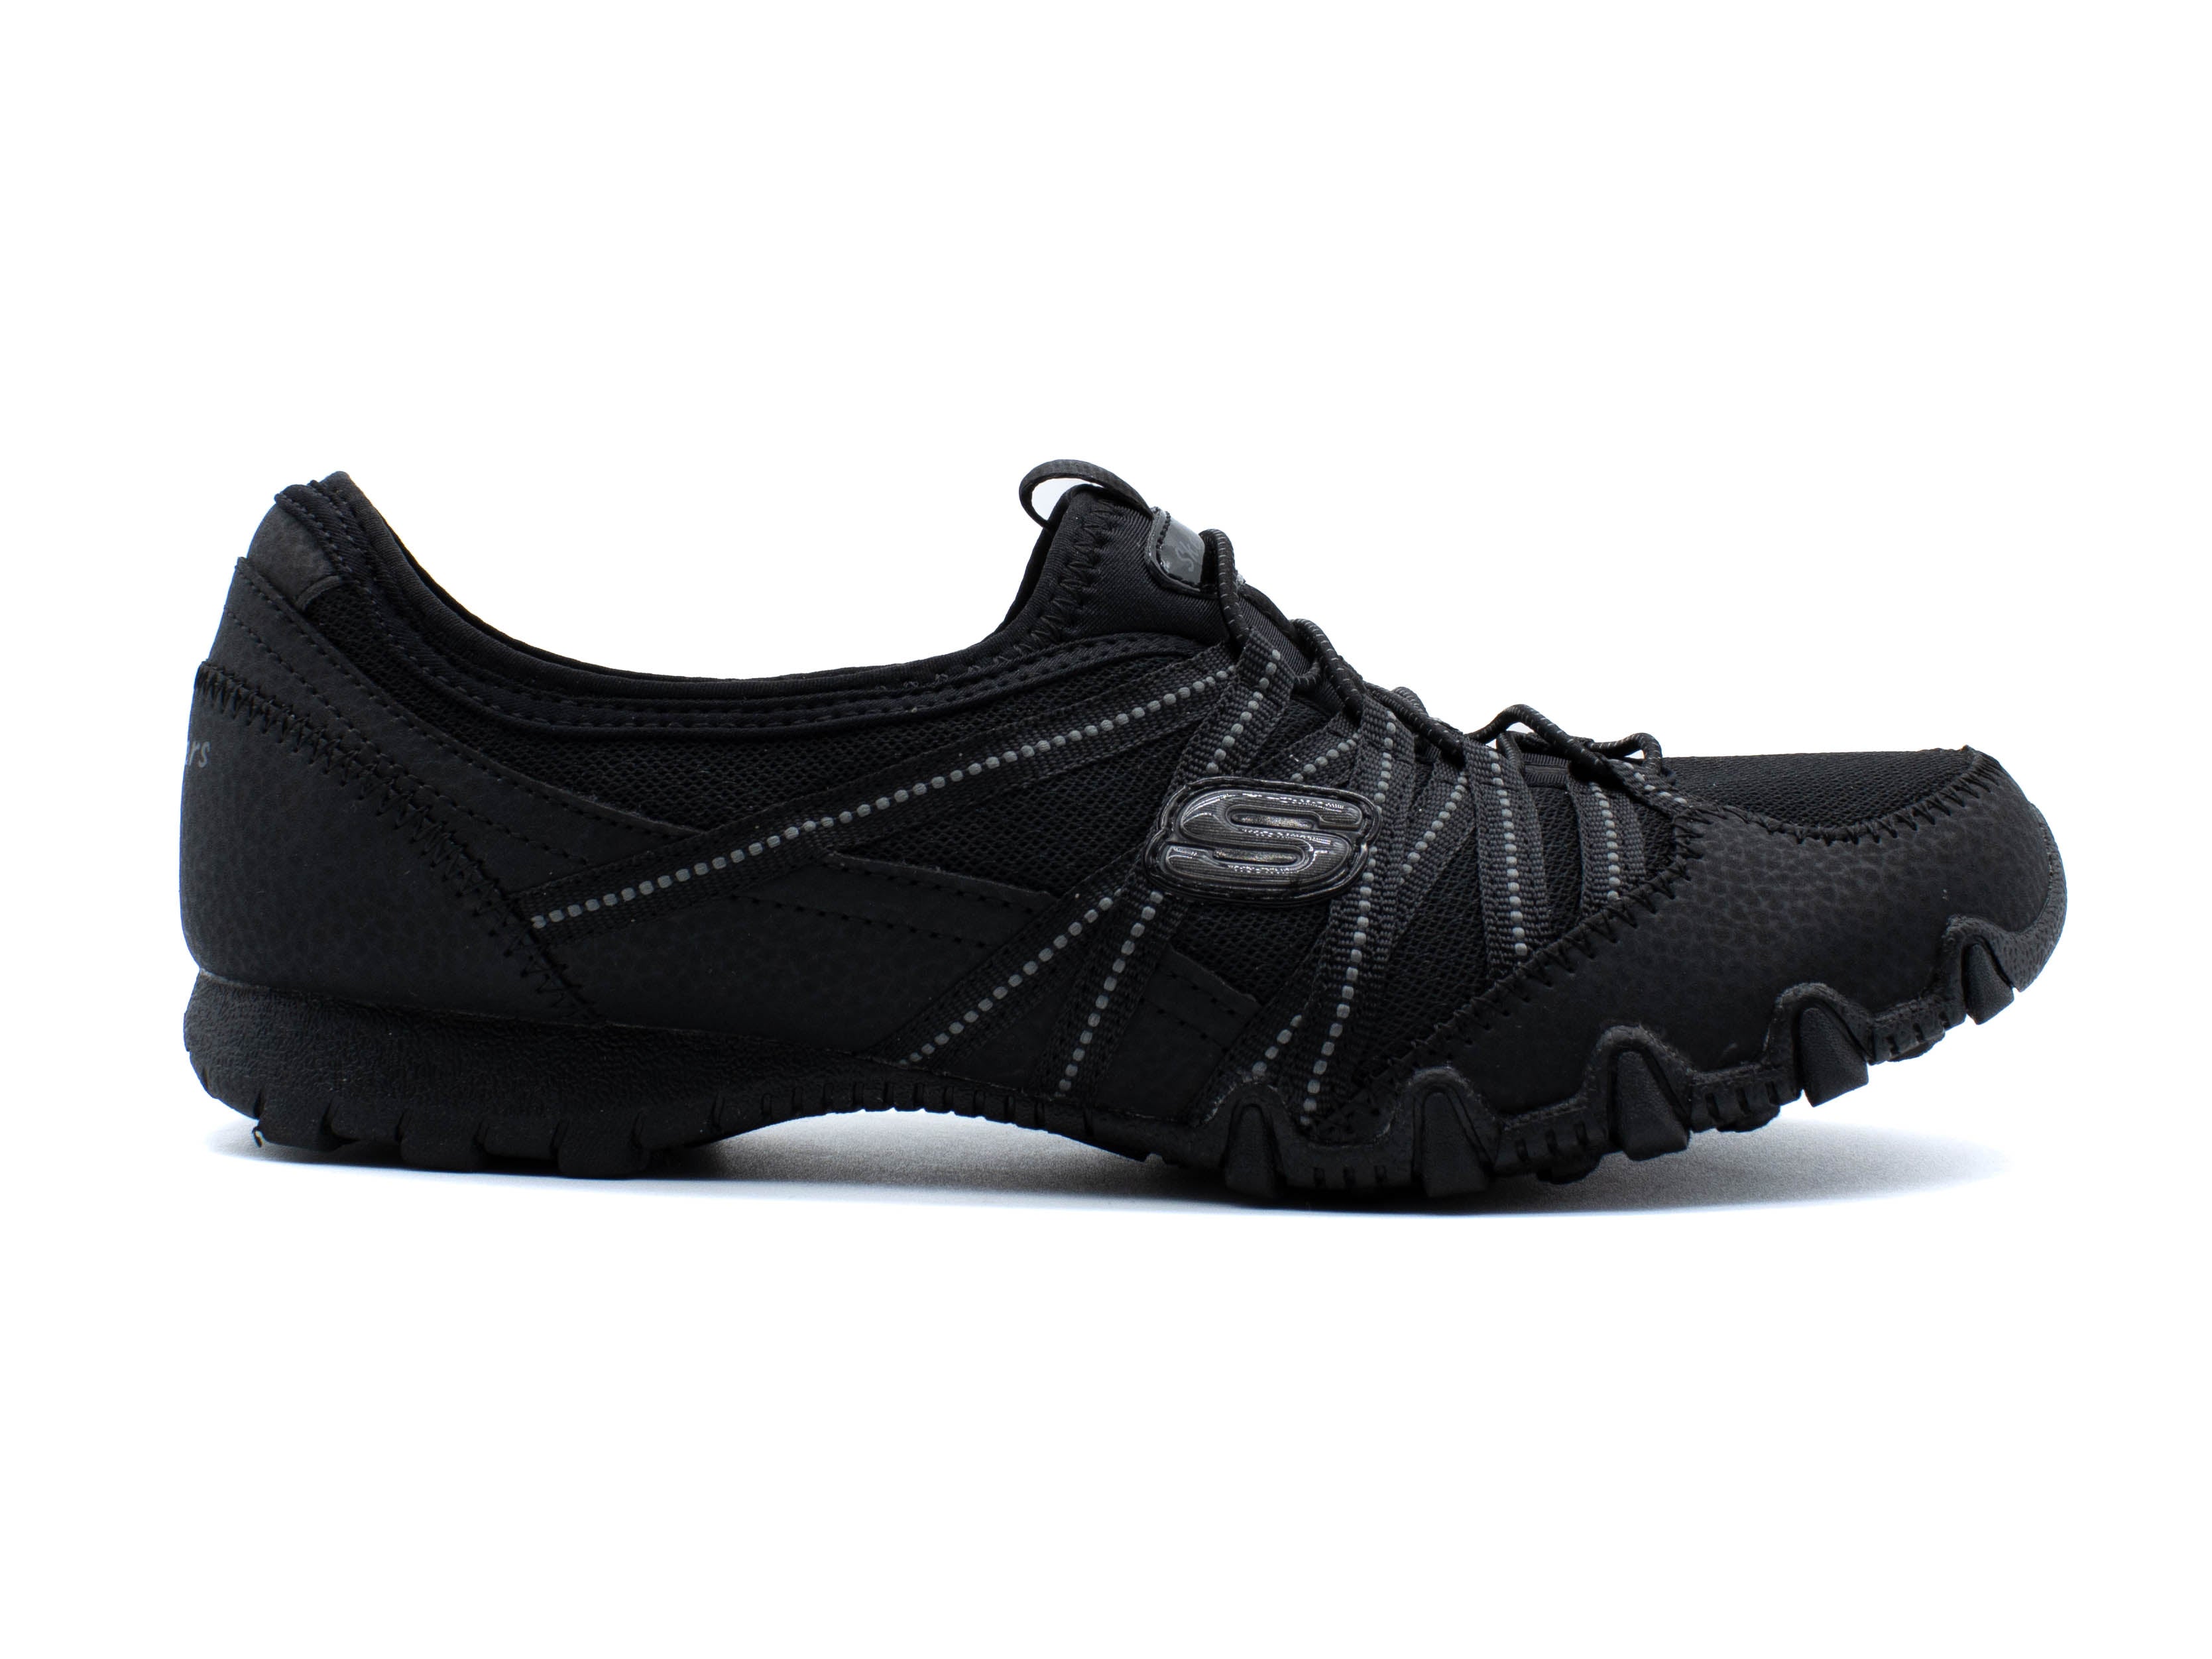 SKECHERS Relaxed Fit: Bikers Lite - Relive